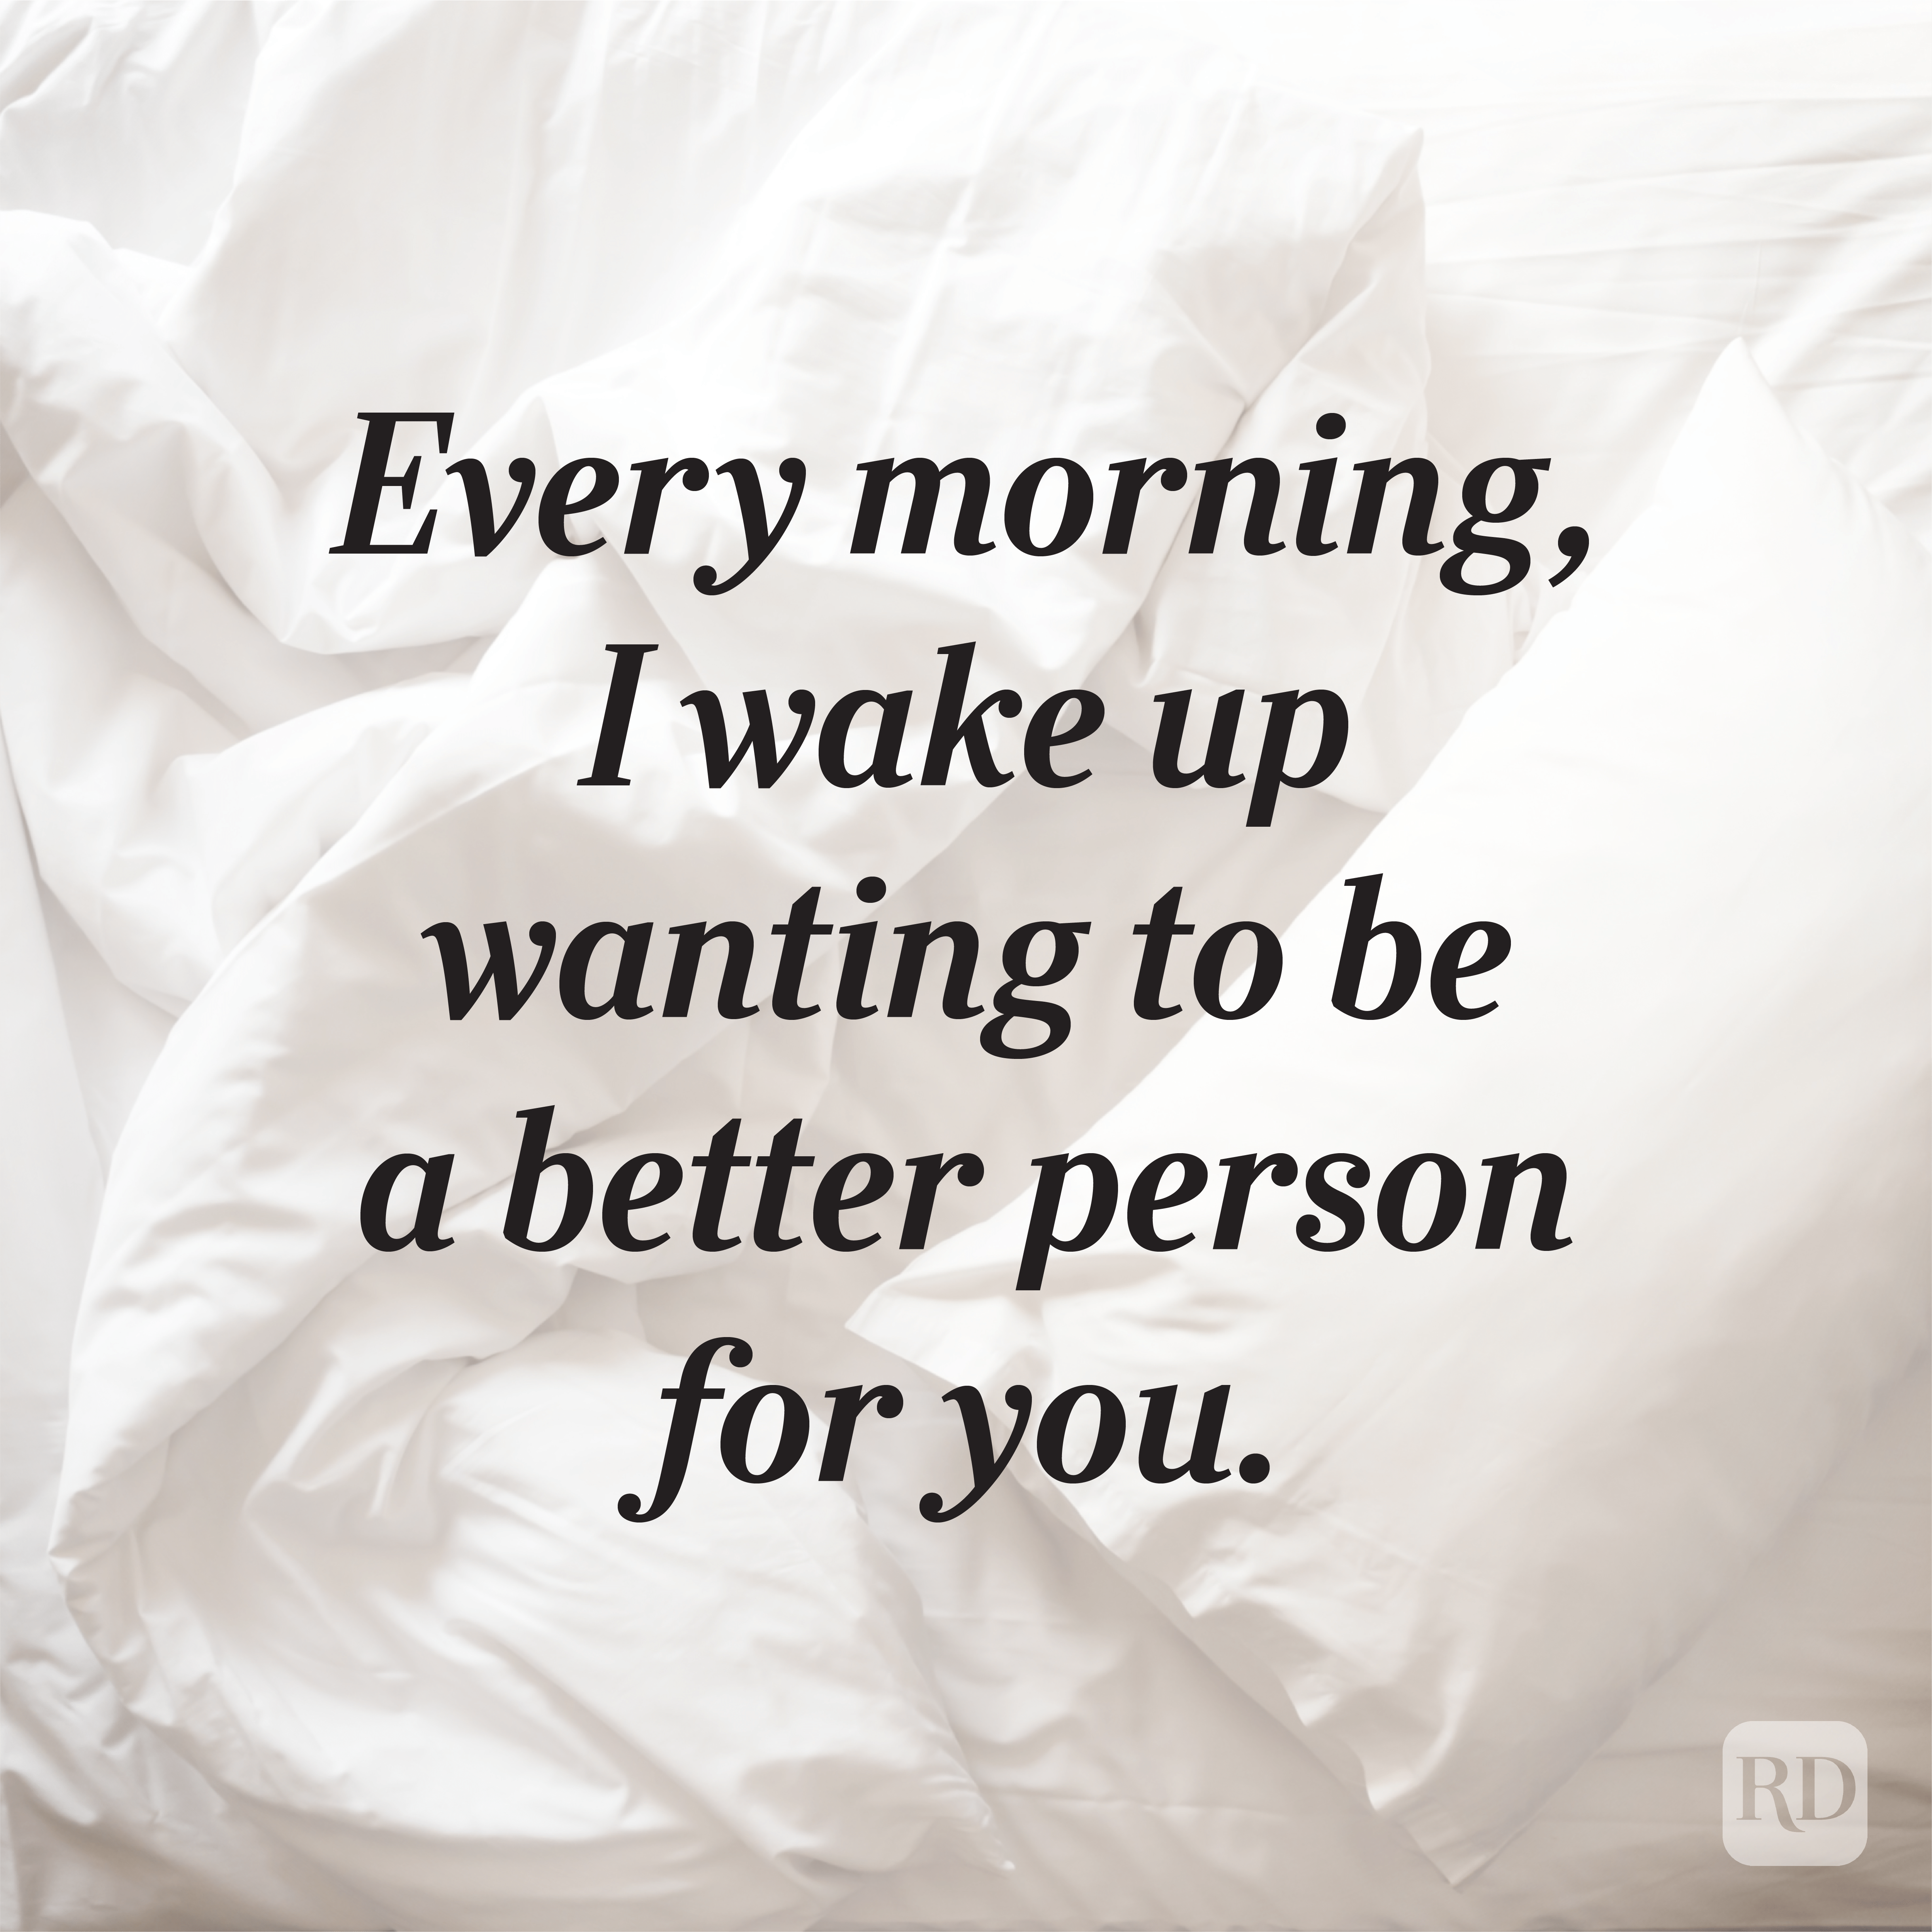 100 Best Good Morning Messages to Send Someone